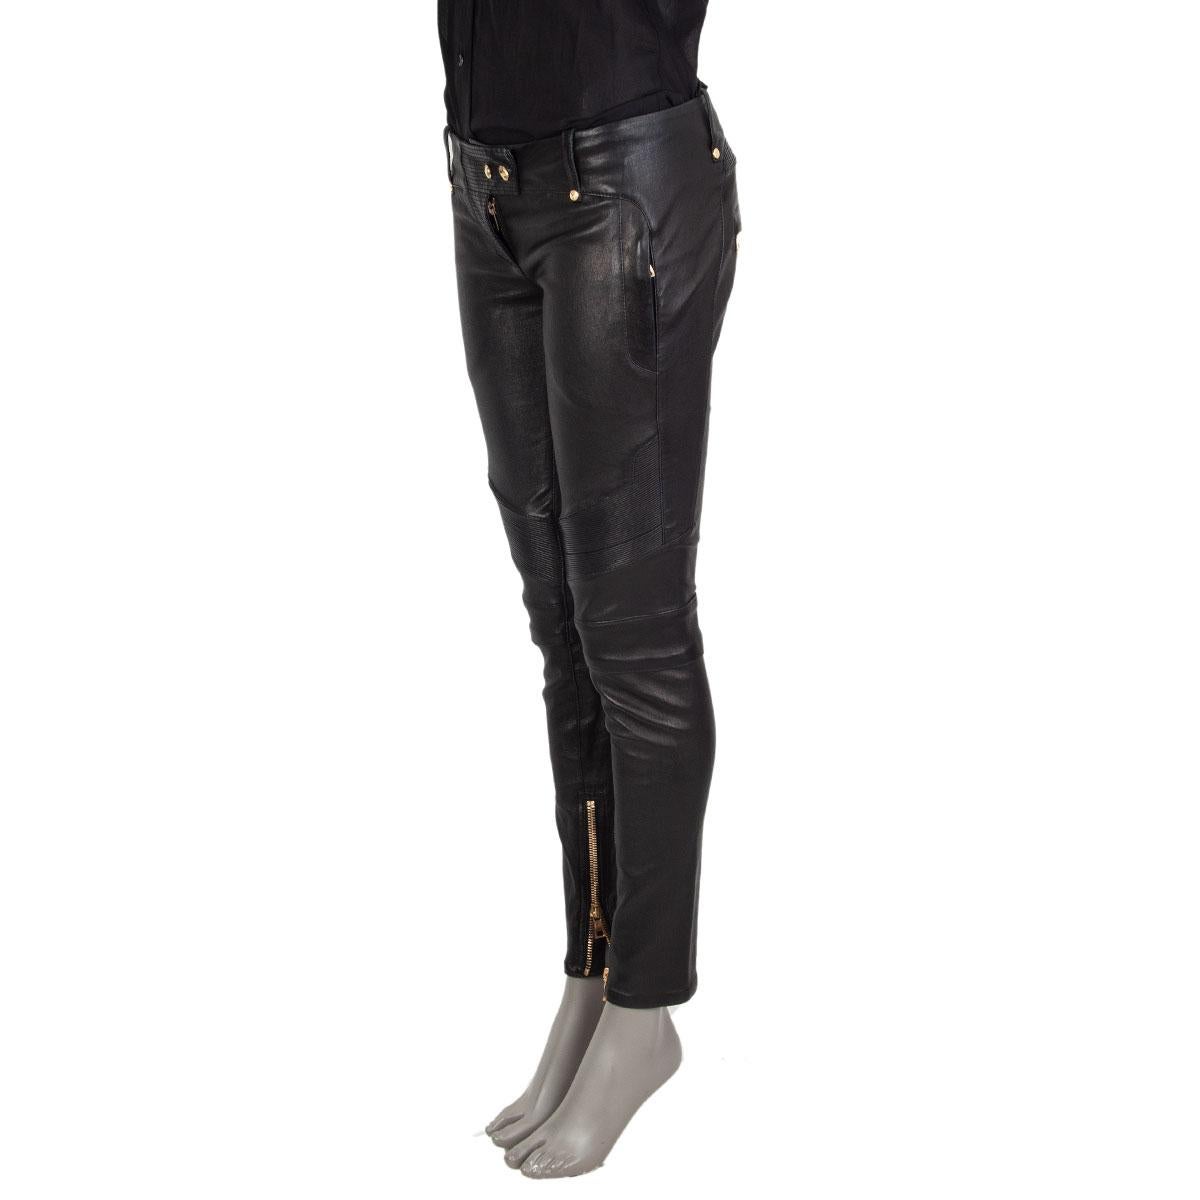 100% authentic Balmain biker pants in black lambskin with gold tone eagle embossed buttons, front zipper pockets, back zipper pockets and cuff zippers. Close on the front with a zipper and buttons. Doublure is cotton (100%). Have been worn and are